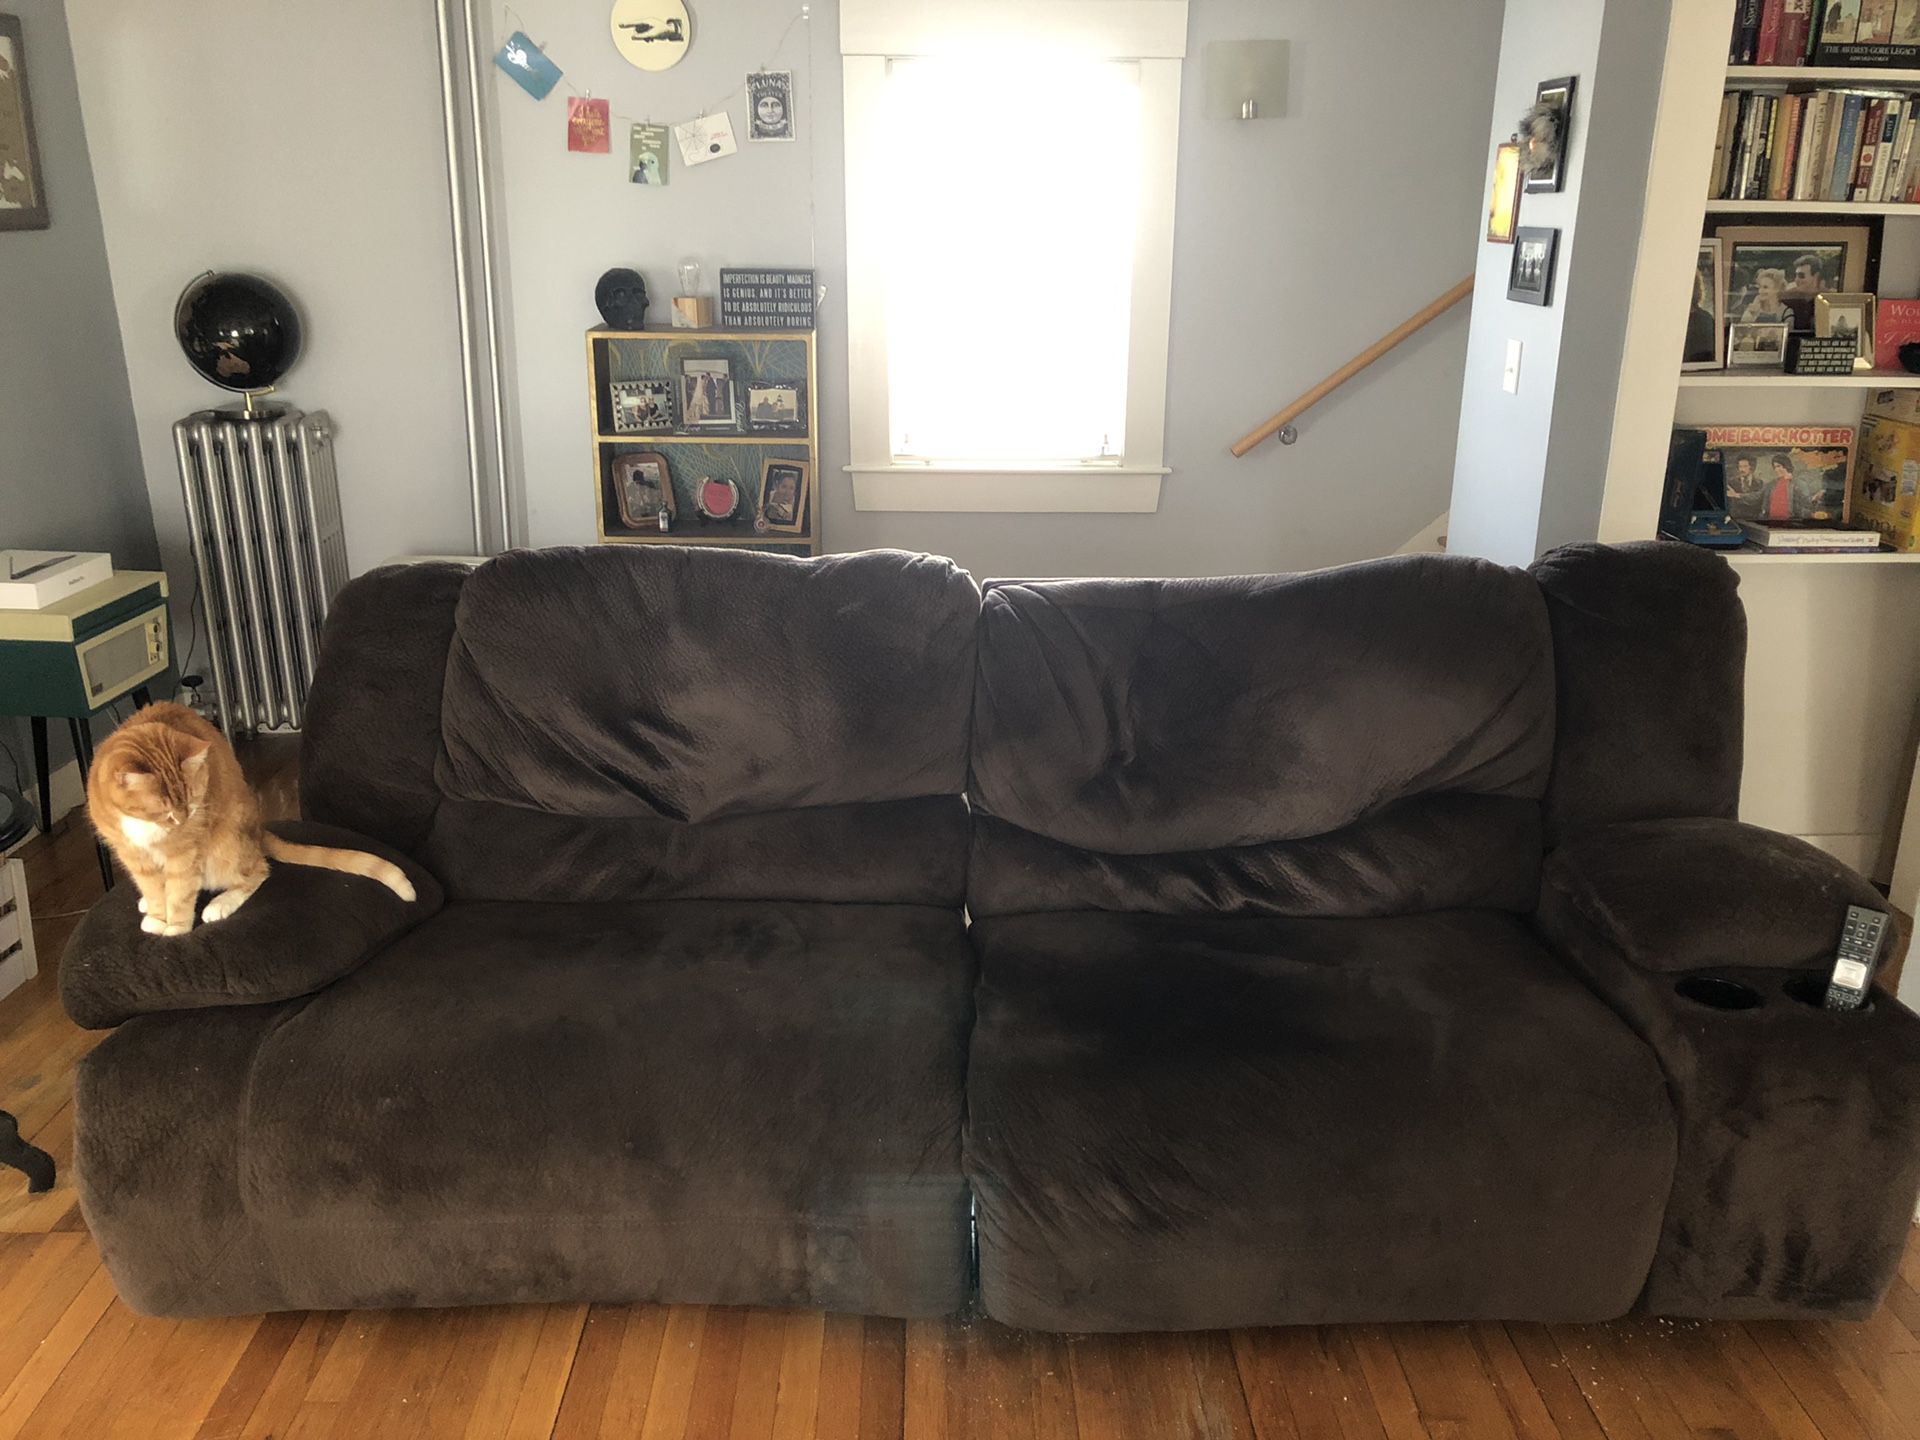 Oversized comfy sectional couch FREE!!